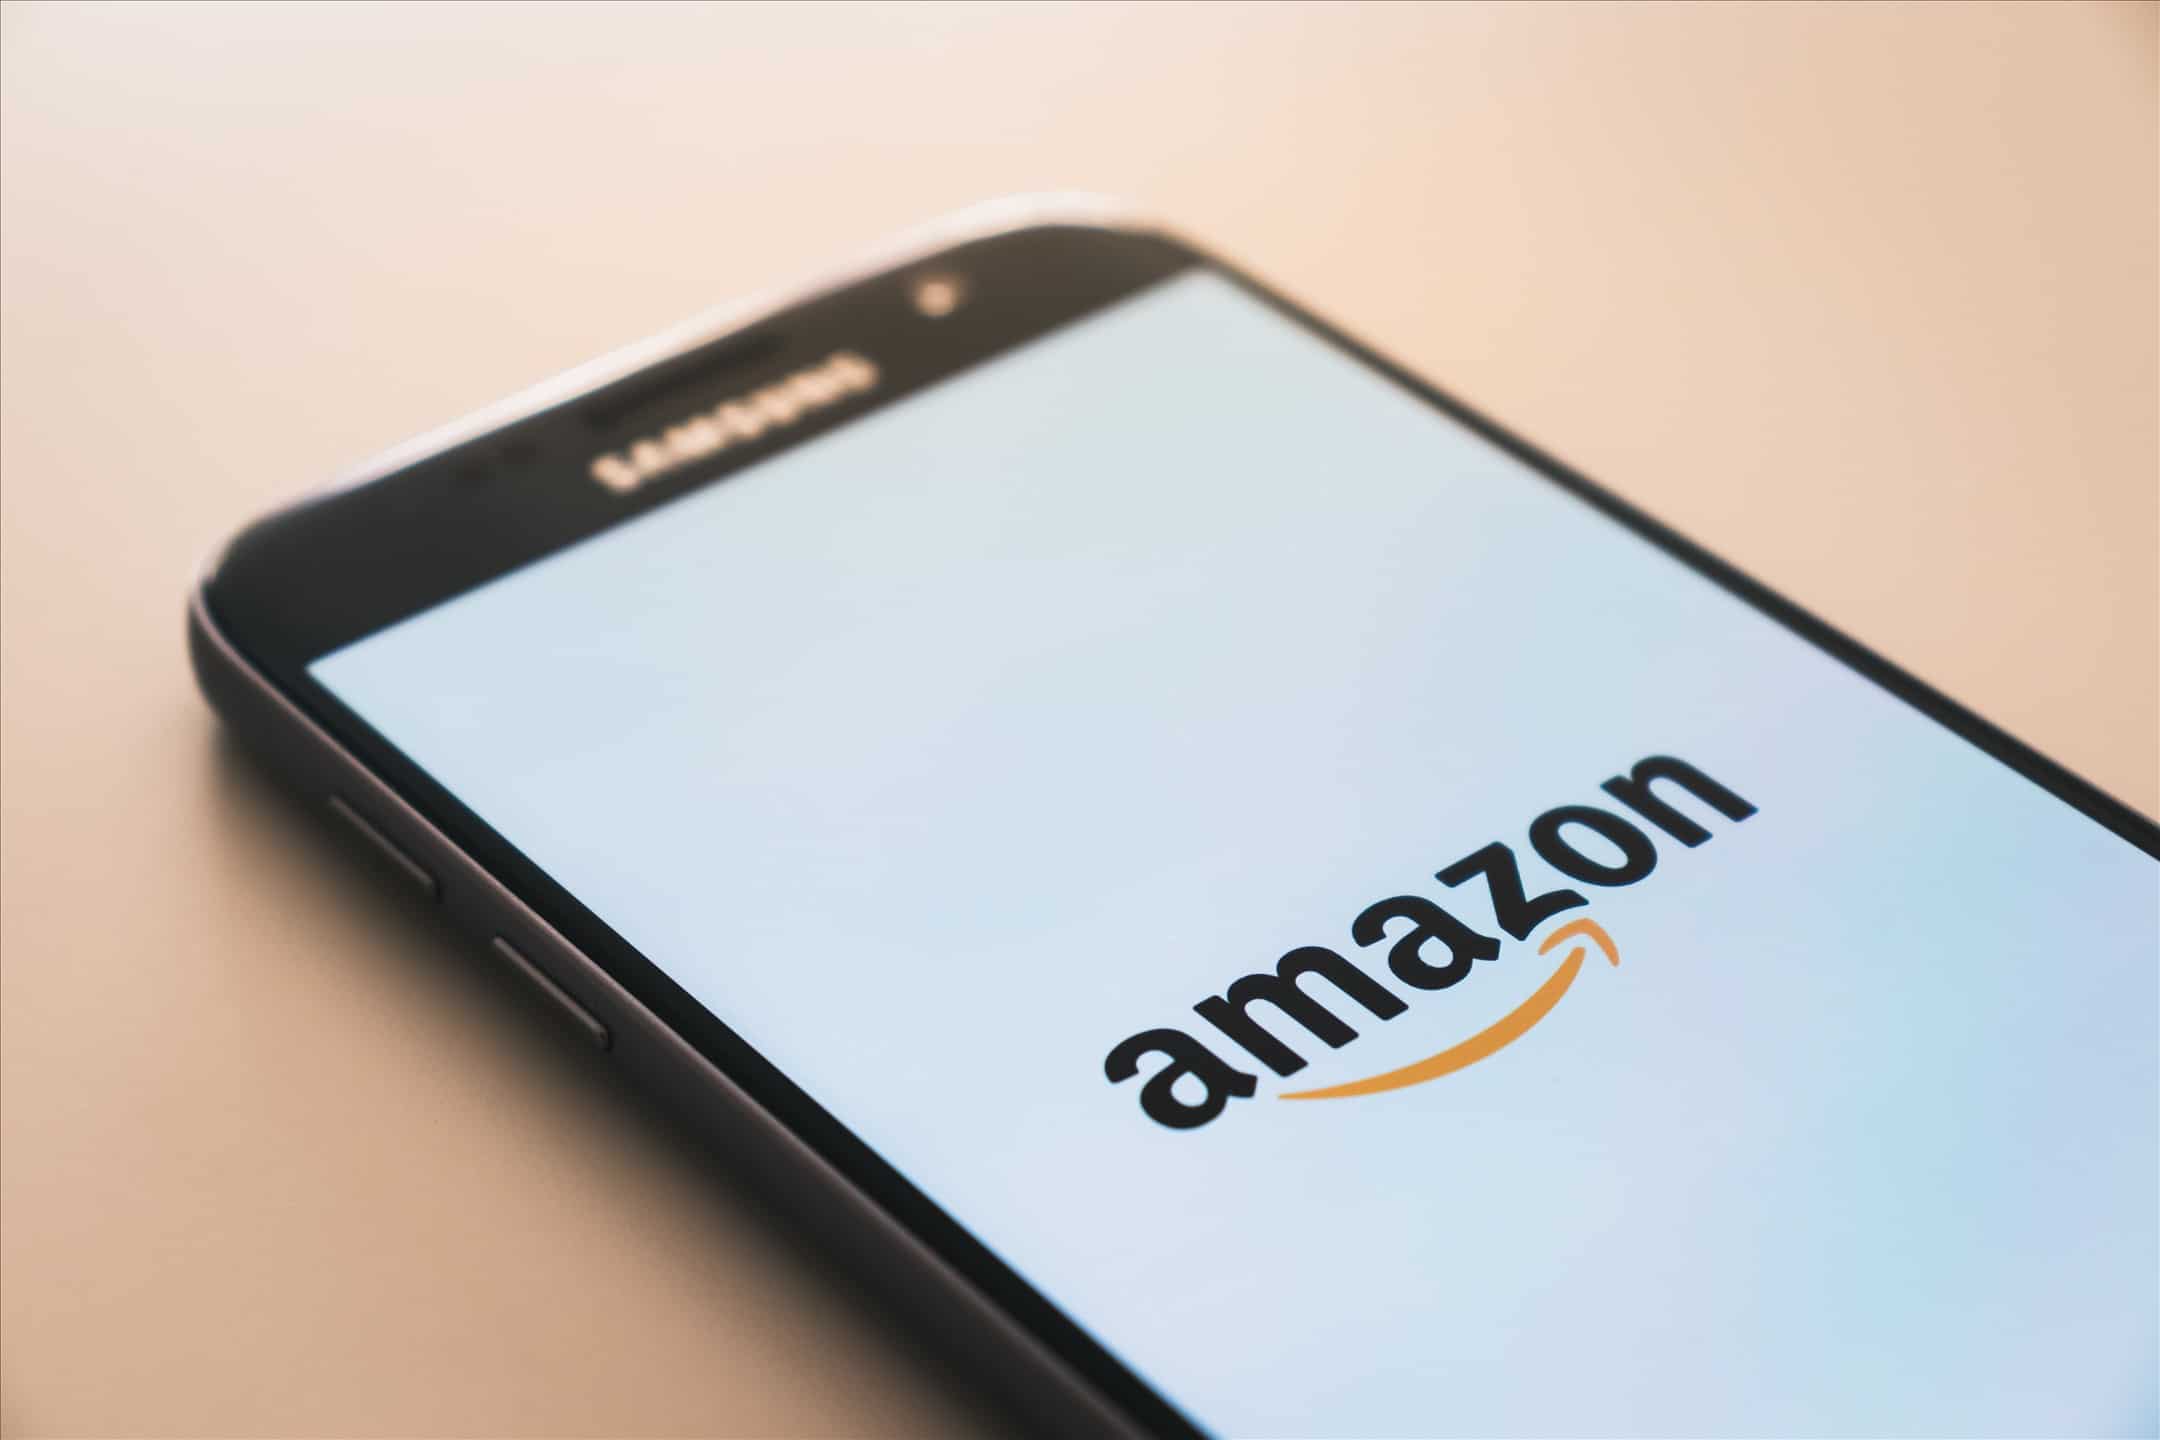 Amazon Prime Day 2022 kicks in with lots of amazing deals and discounts at Amazon